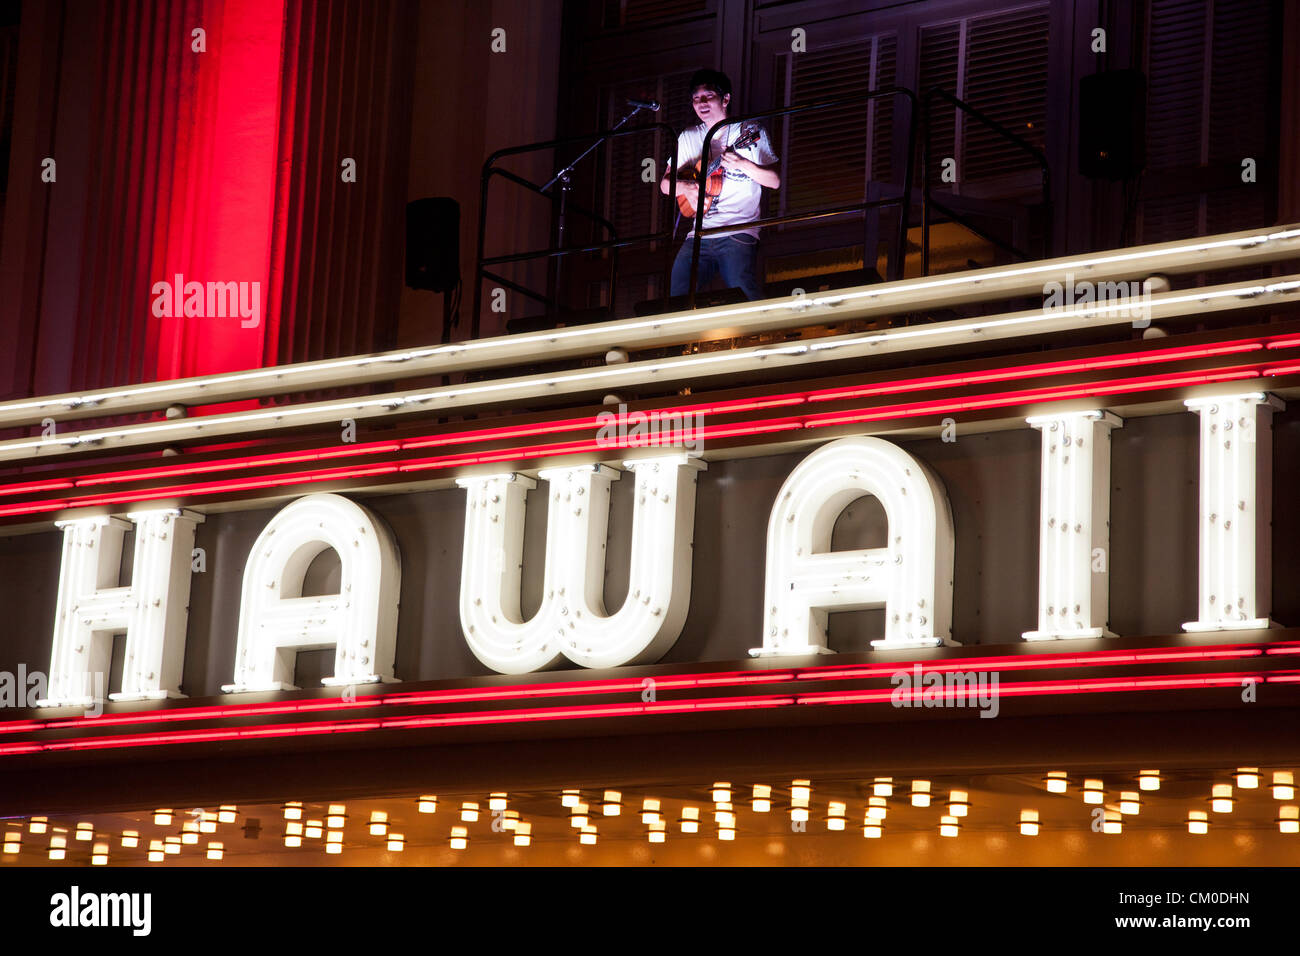 Honolulu, Hawaii. 7th September 2012. Jake Shimabukuro, master of the ukulele plays atop The Hawaii Theater marquee on September 7, 2012 in Honolulu, Hawaii. Jake Shimabukuro is the first person ever to perform on the marquee and is performing in advance of his upcoming release, “Grand Ukulele” produced by Alan Parsons who produced The Beatles “Abby Road” and Pink Floyd’s Dark Side of the Moon”. “Grand Ukulele” also features covers of Adele’s “Rolling In the Deep,” Sting’s “Fields of Gold” and the Judy Garland classic “Over the Rainbow.” Stock Photo